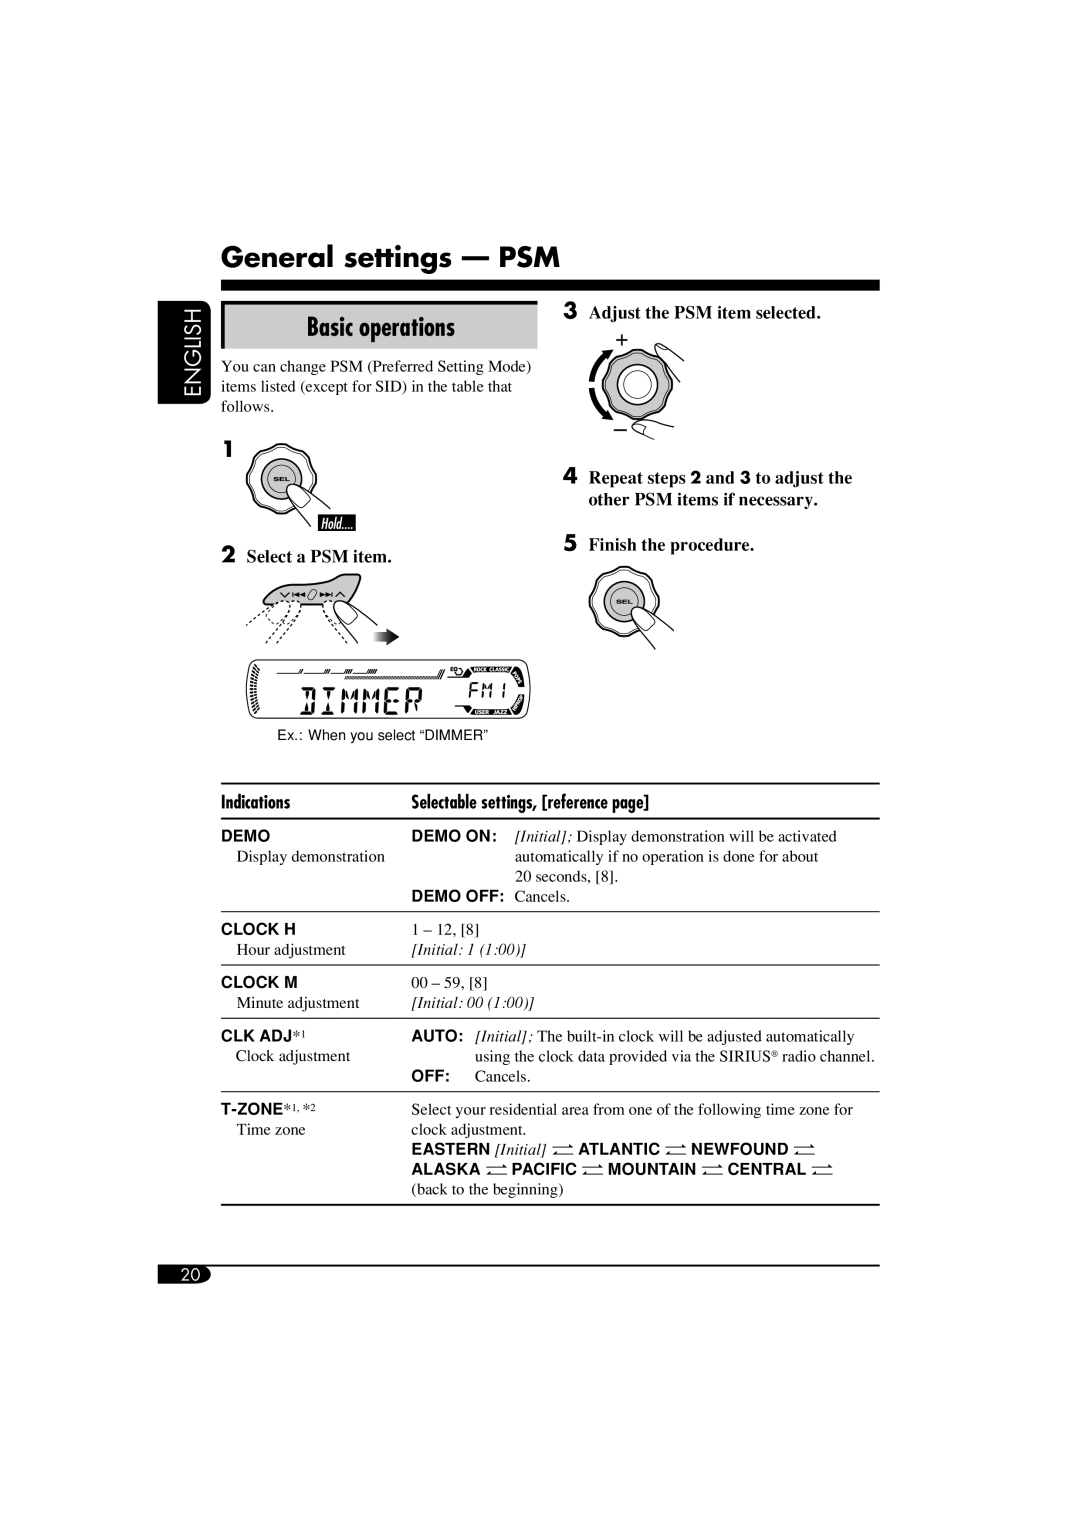 JVC KD-AR360 General settings - PSM, Basic operations, English, 2Select a PSM item, 3Adjust the PSM item selected, Demo 